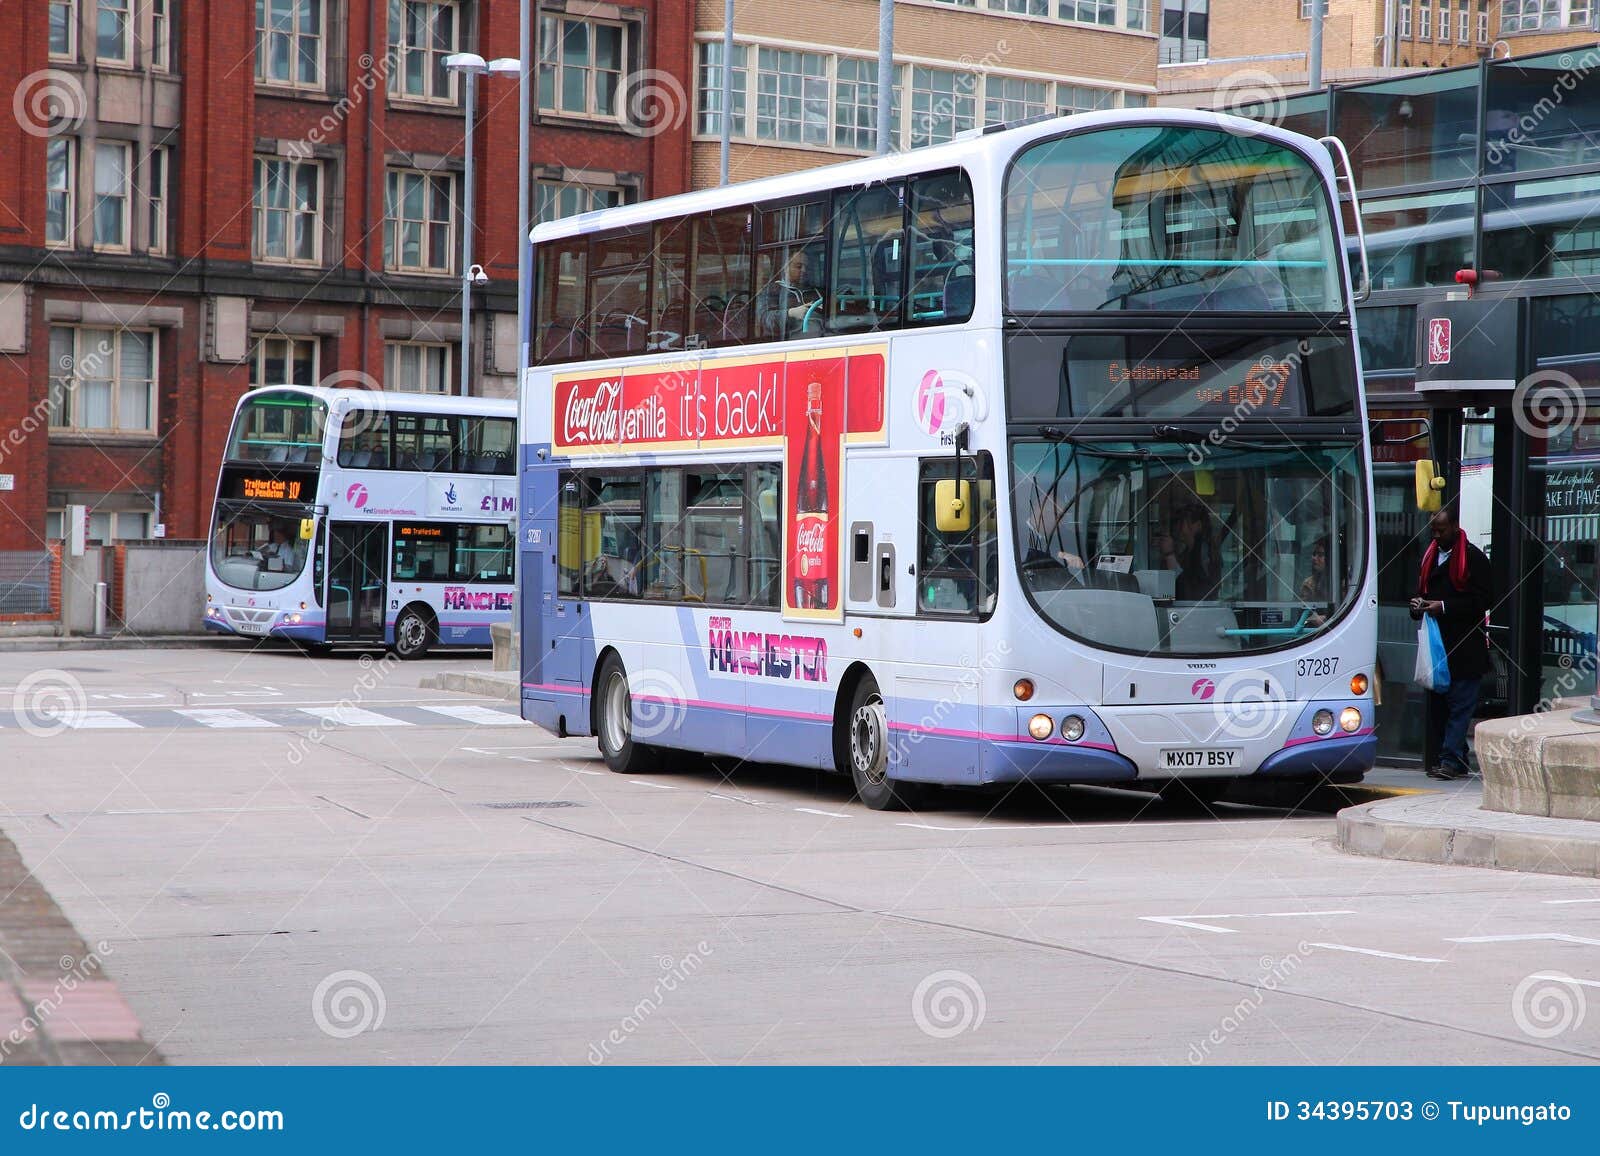 Manchester buses editorial stock photo. Image of group - 34395703